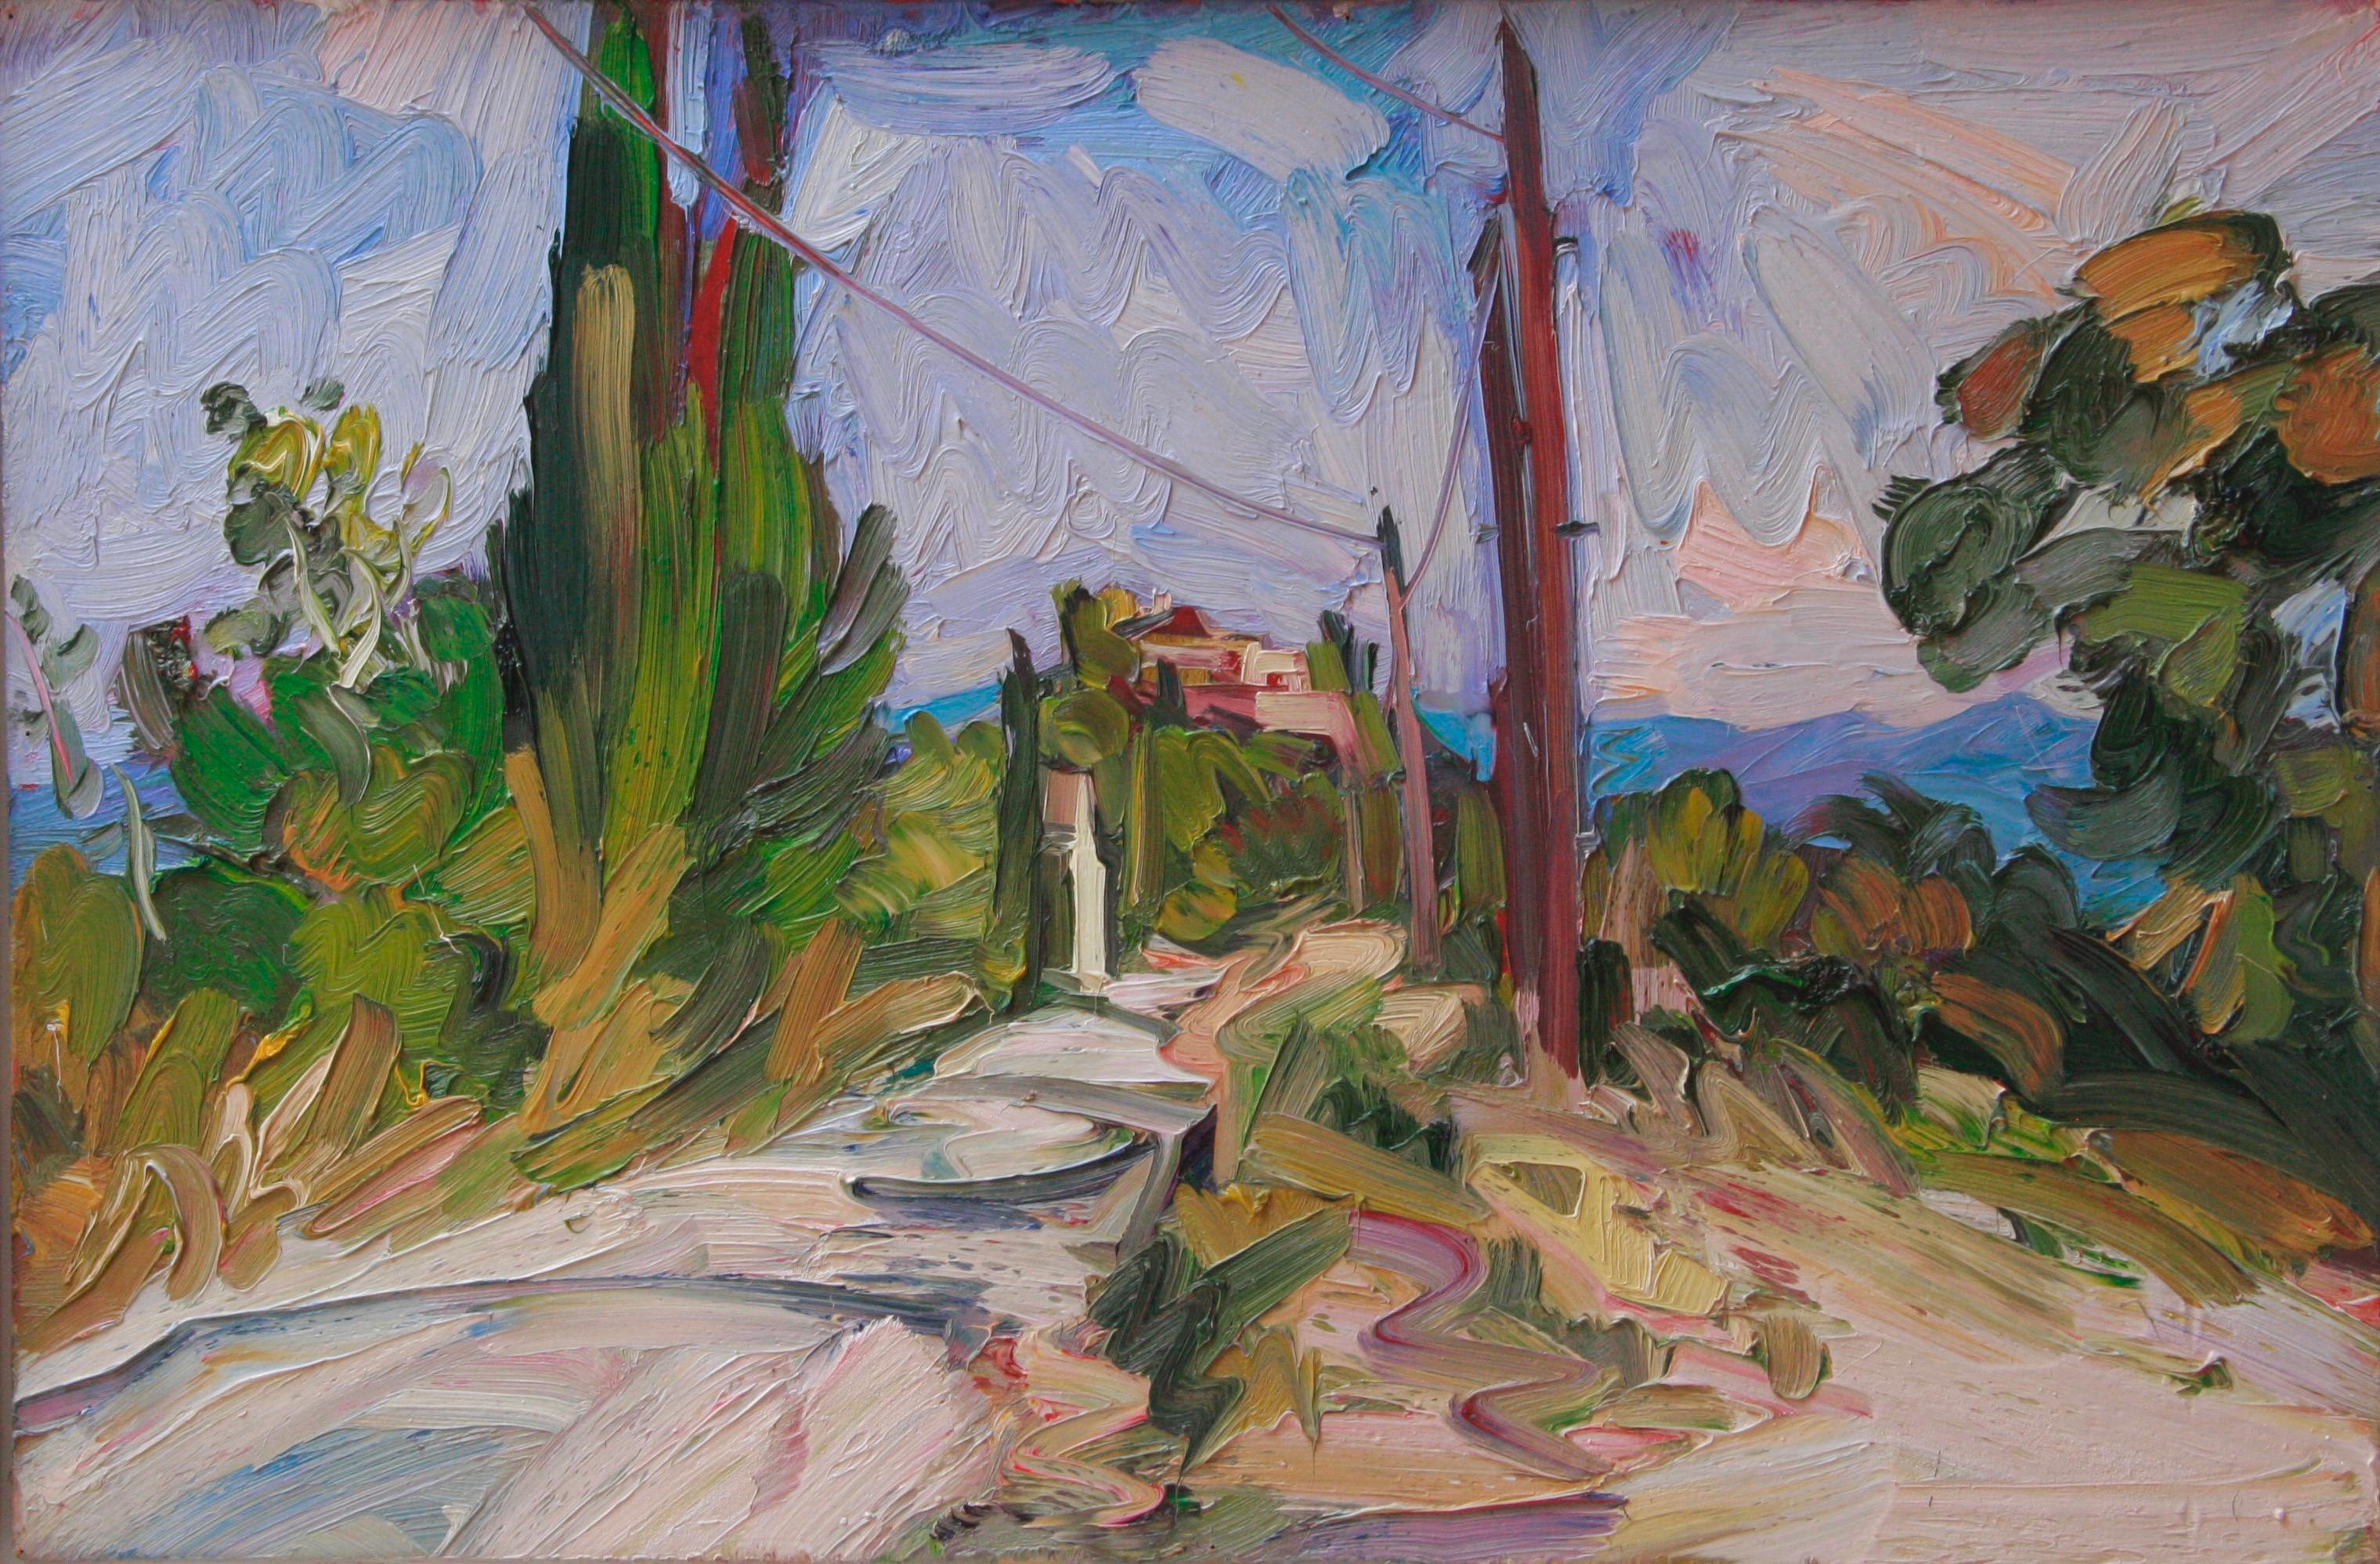 THE WHITE HOUSE on the road toSAINT FERREOL. EDWARD BEALE British contemporary   - Abstract Impressionist Painting by Edward Beale